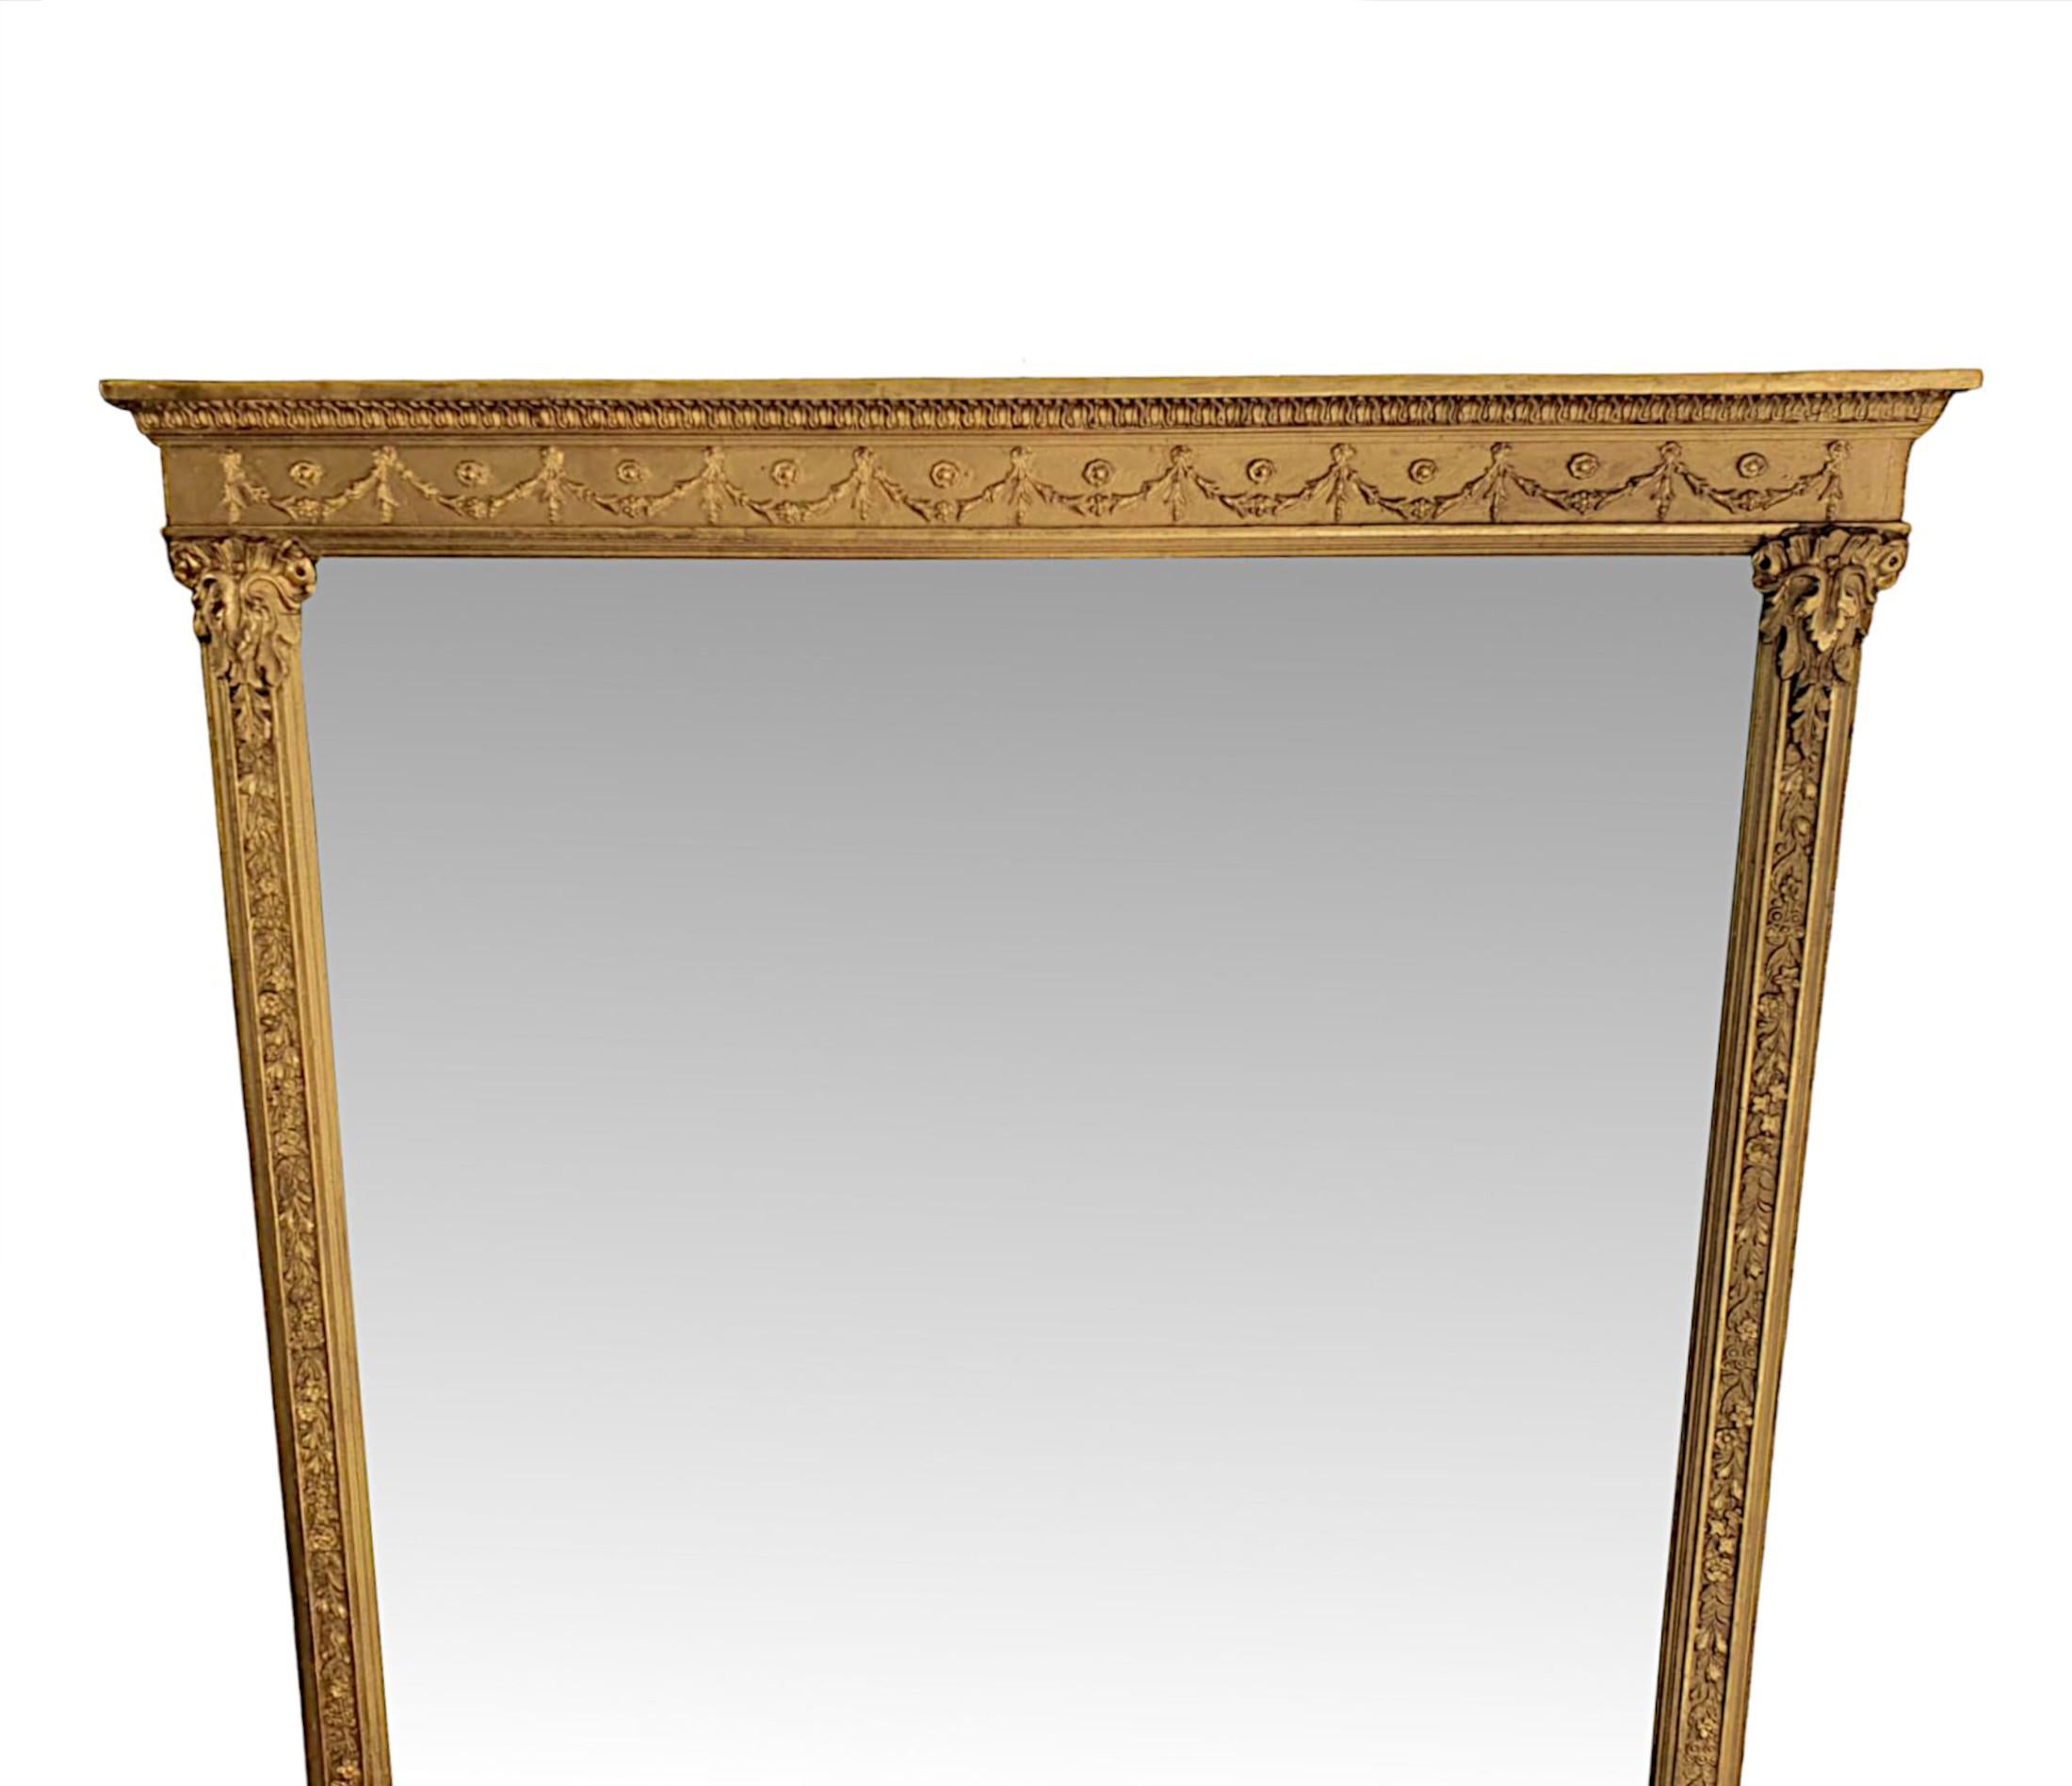 English Fabulous 19th Century Giltwood Overmantle Mirror After Adams For Sale